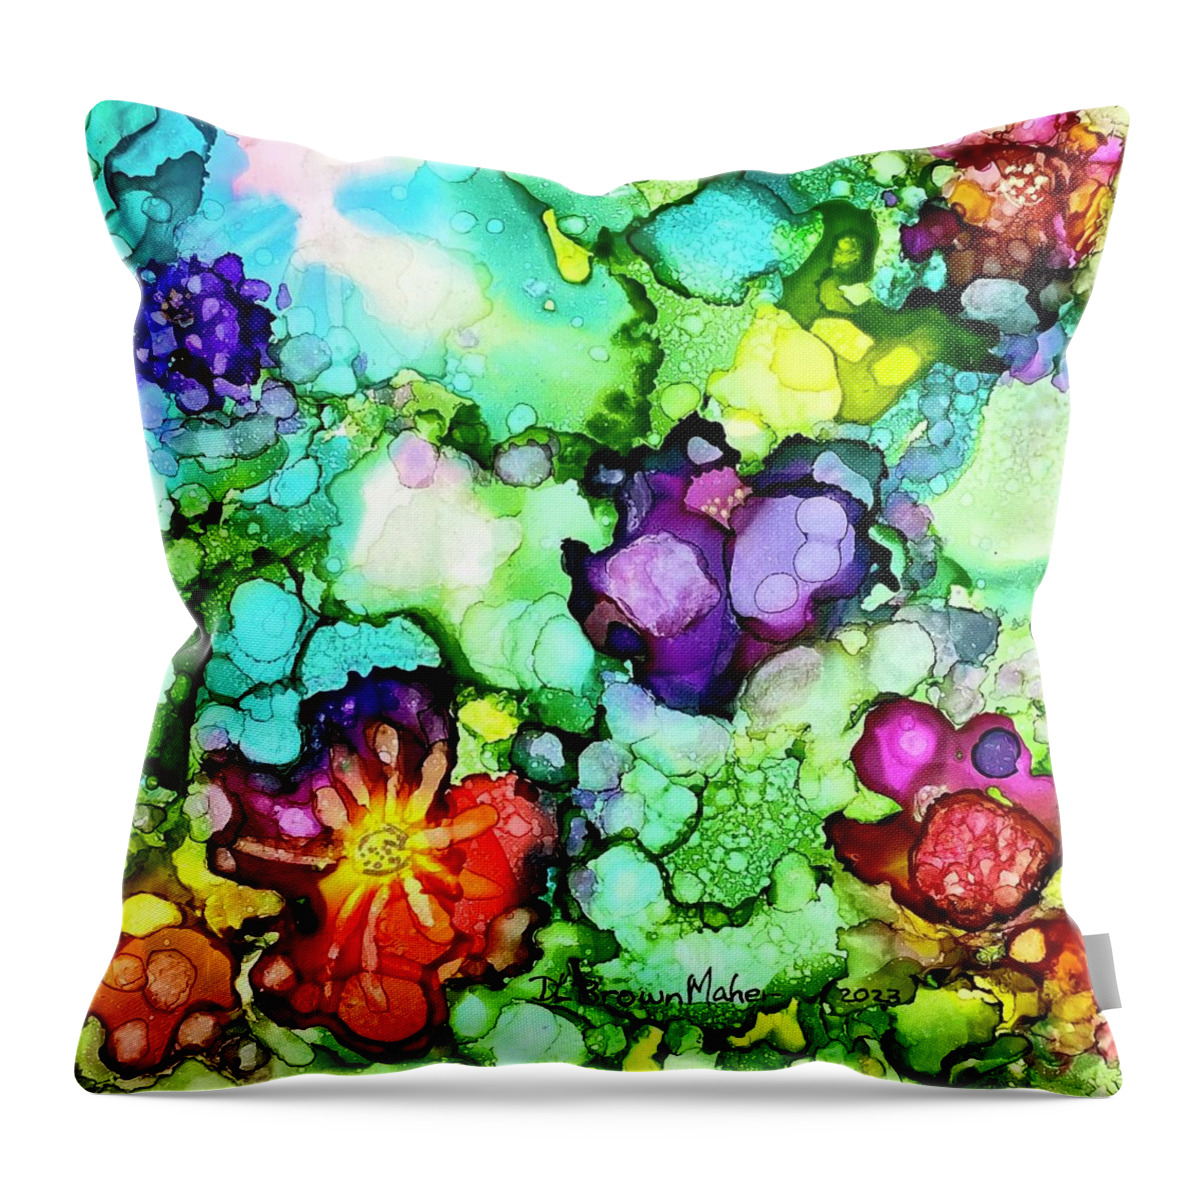 Garden Throw Pillow featuring the painting Pansies by Deb Brown Maher